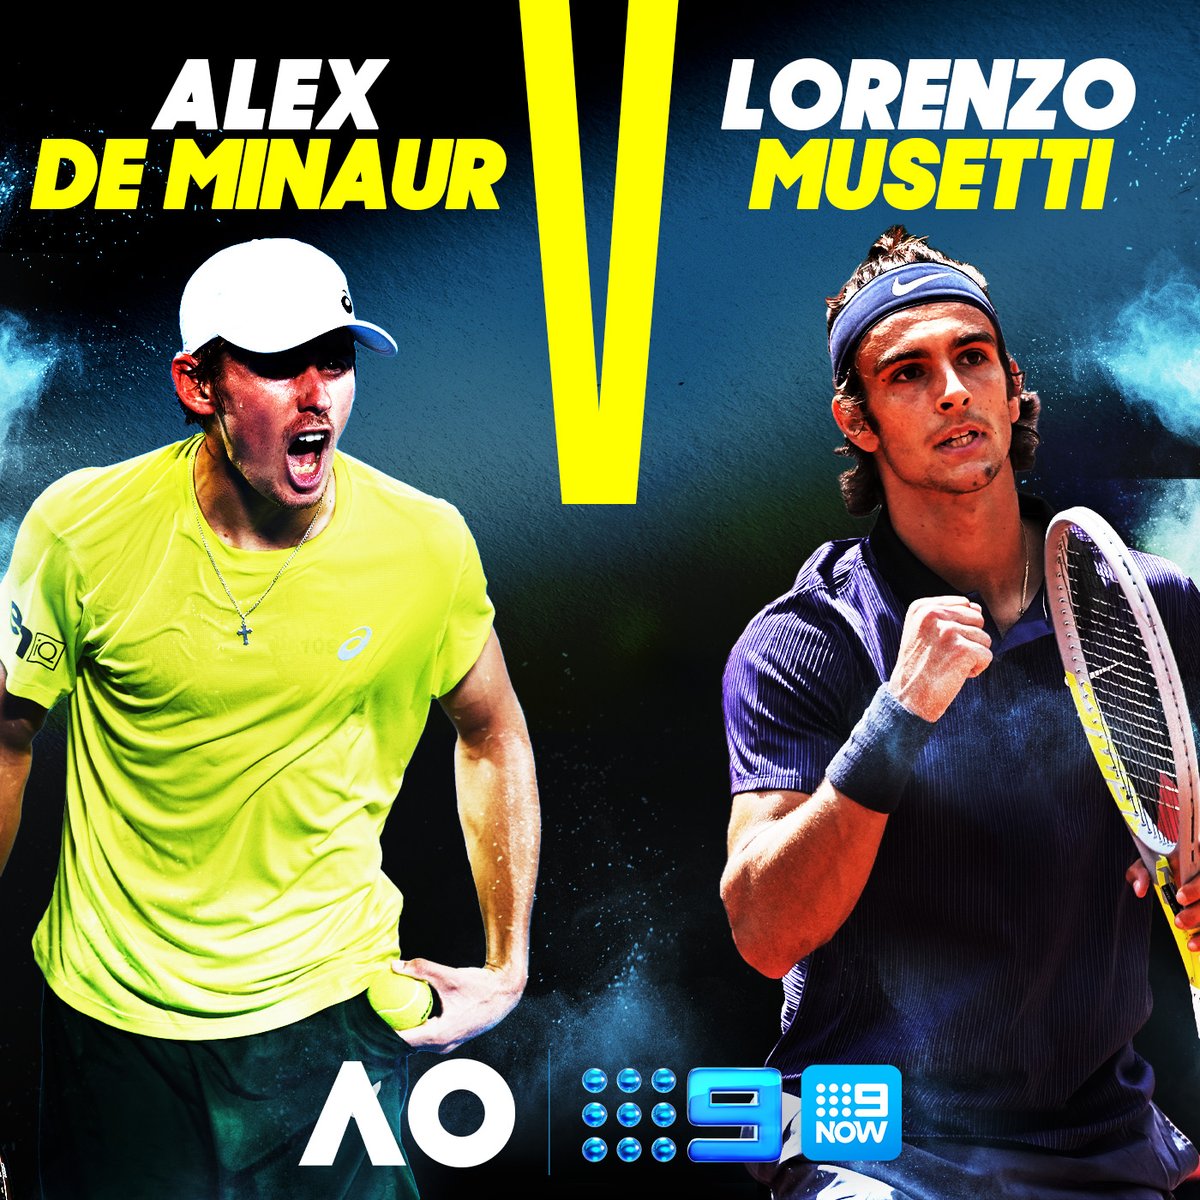 Fresh off a ripping summer, the Demon's Aus Open campaign kicks off tonight! 😈🎾 #AusOpen - Live on 9Gem and 9Now